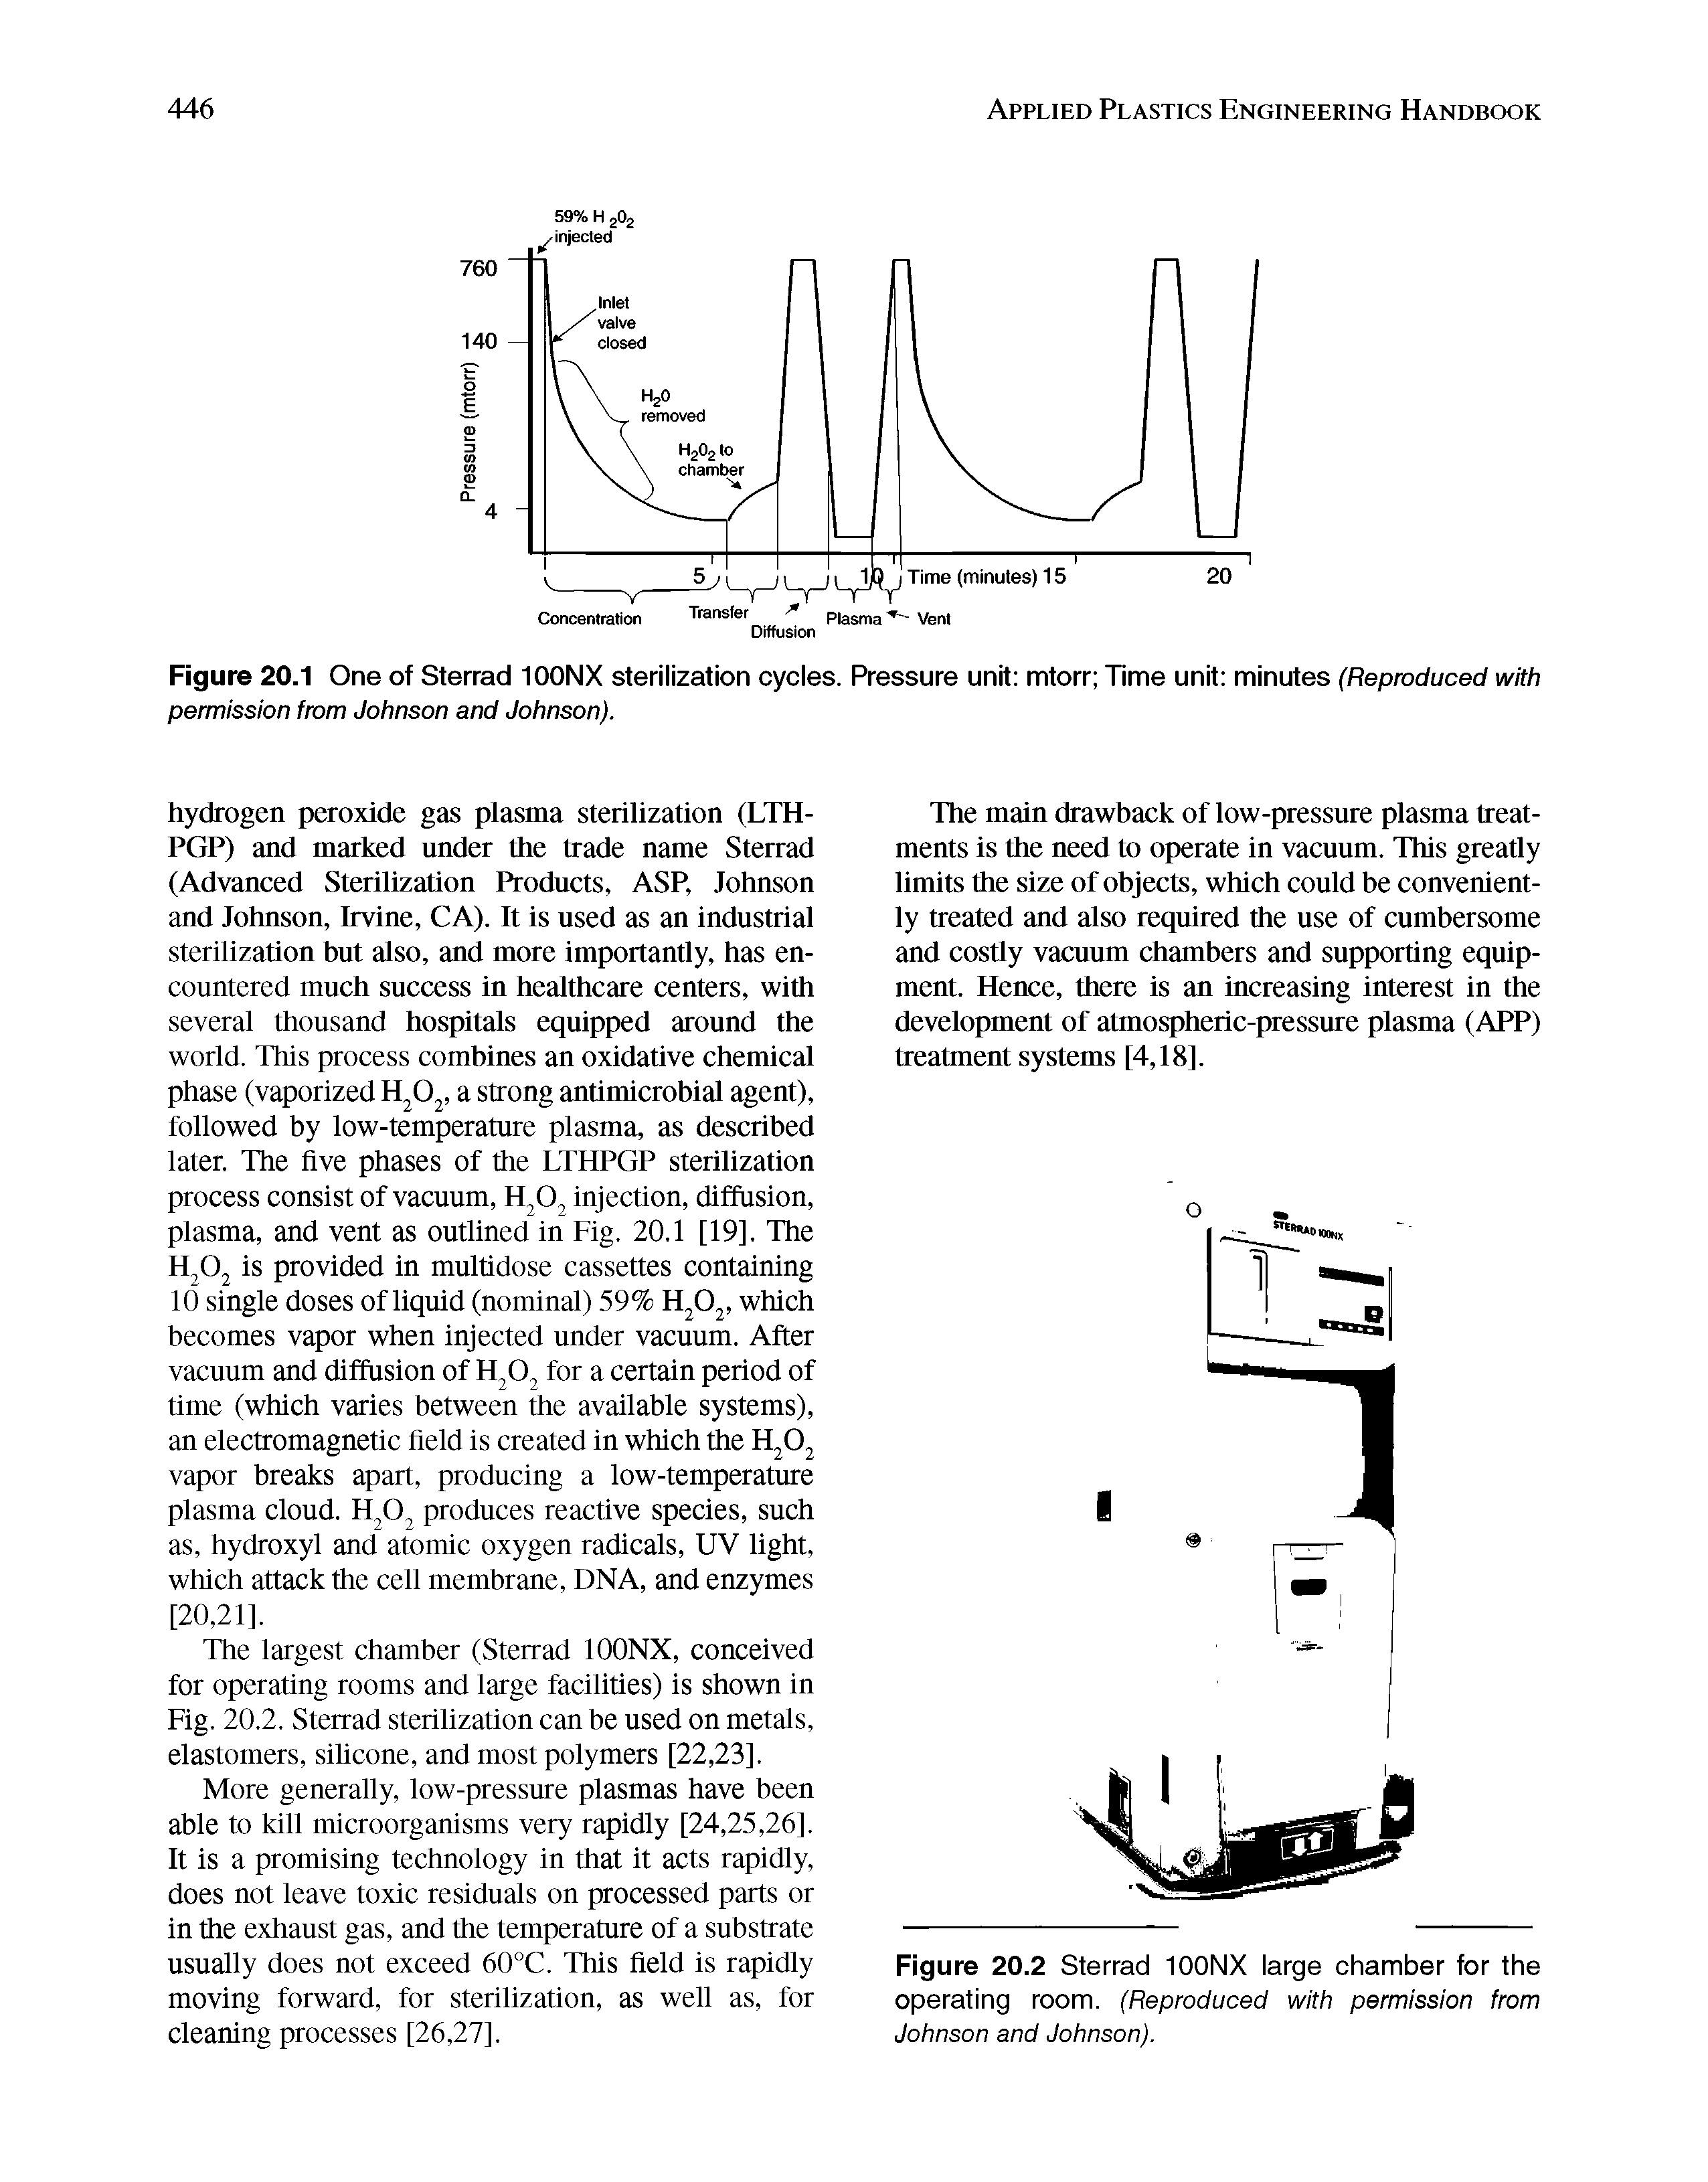 Figure 20.1 One of Sterrad 100NX sterilization cycles. Pressure unit mtorr Time unit minutes (Reproduced with permission from Johnson and Johnson).